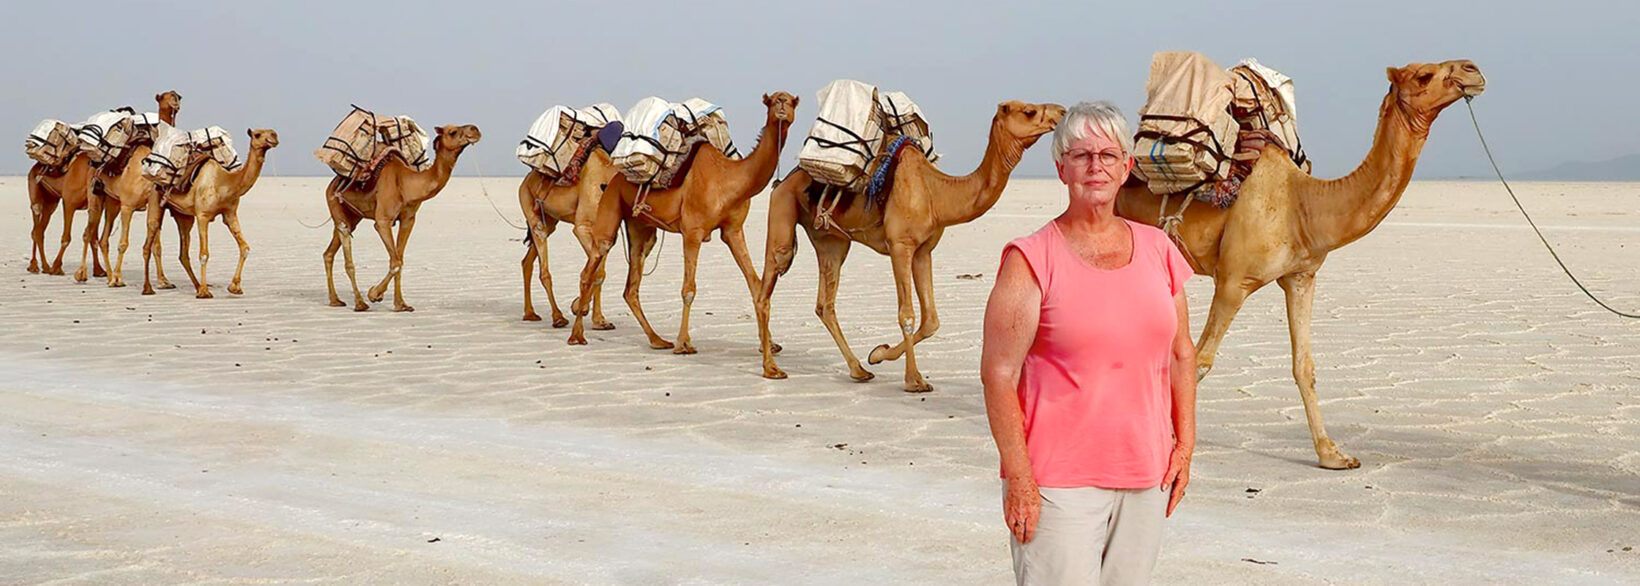 Barbara Weibel in front of a camel caravan carrying salt bocks at the Danakil Depression in Ethiopia, one of the hottest places on earth